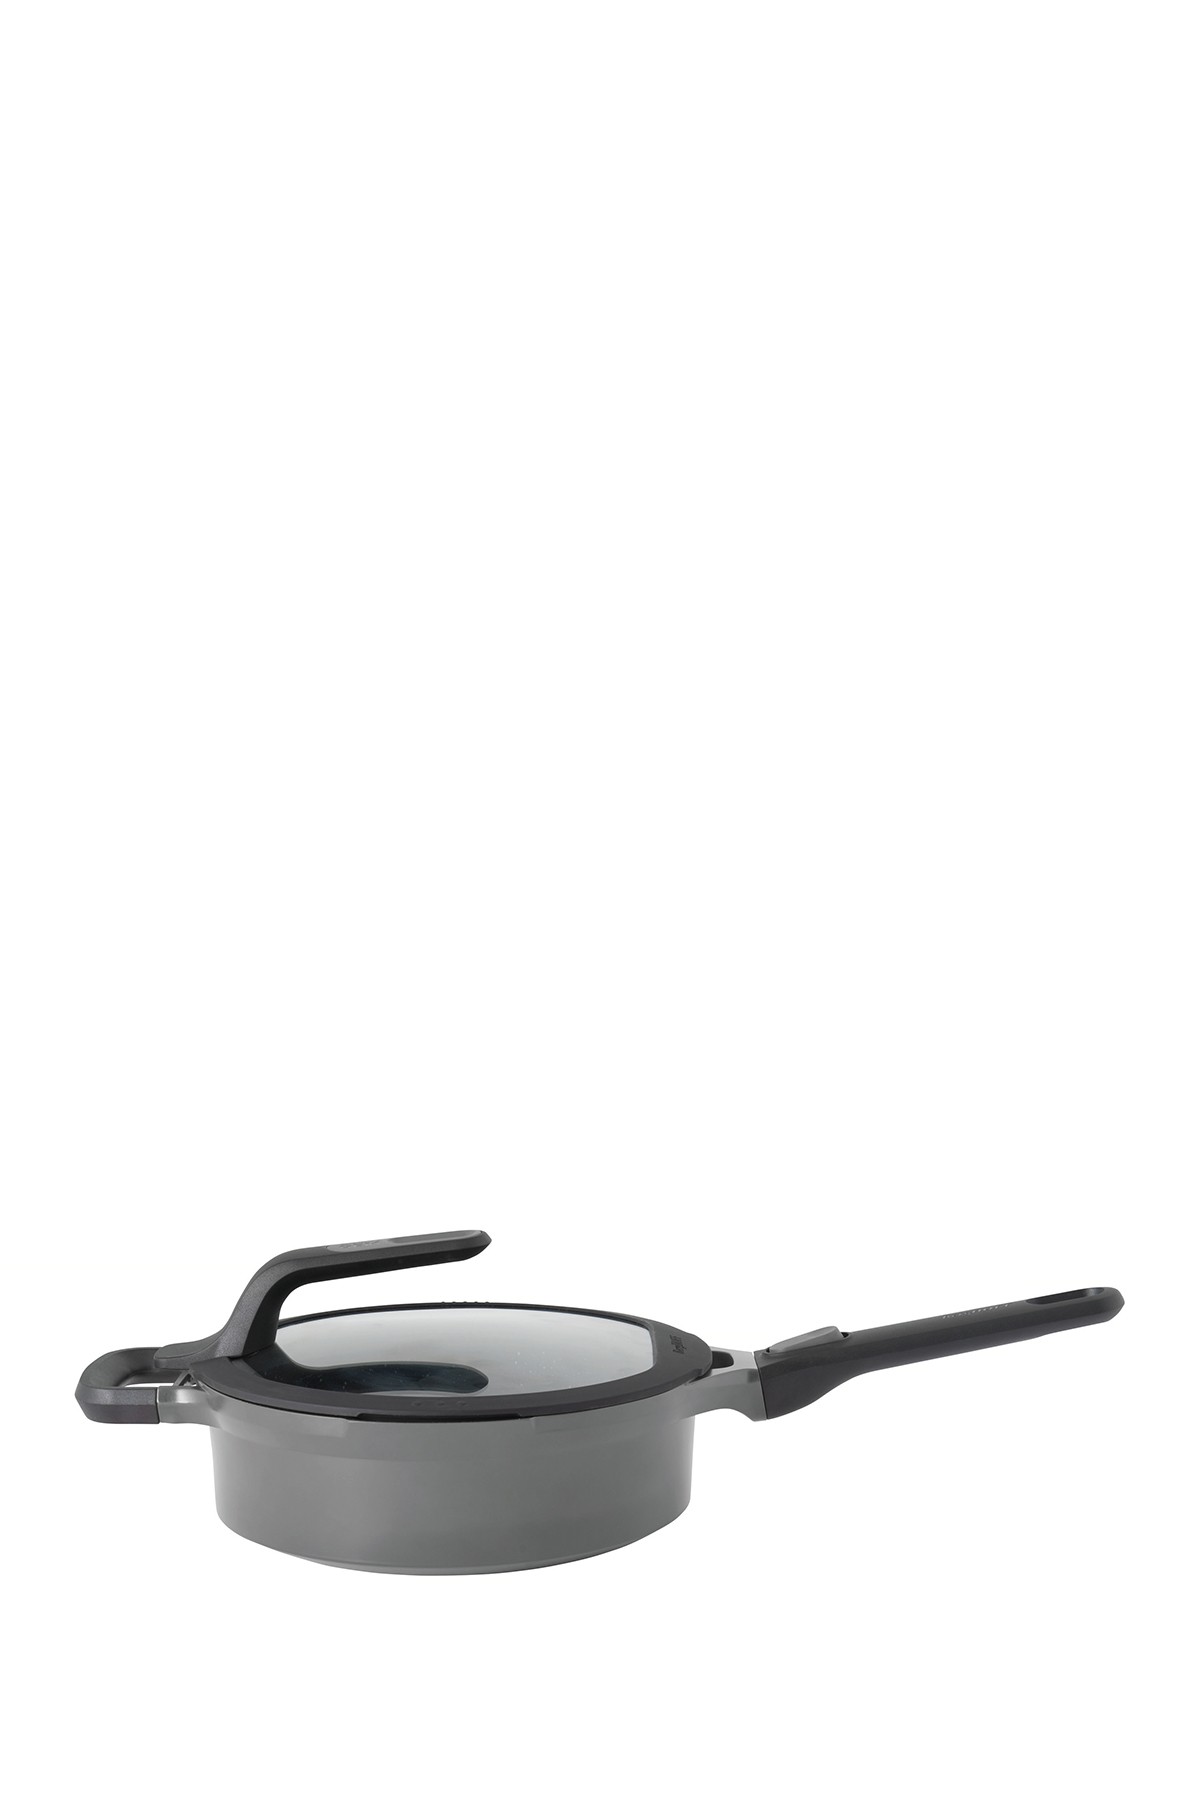 Grey Gem 10" Stay-Cool Covered Saute Pan BergHOFF